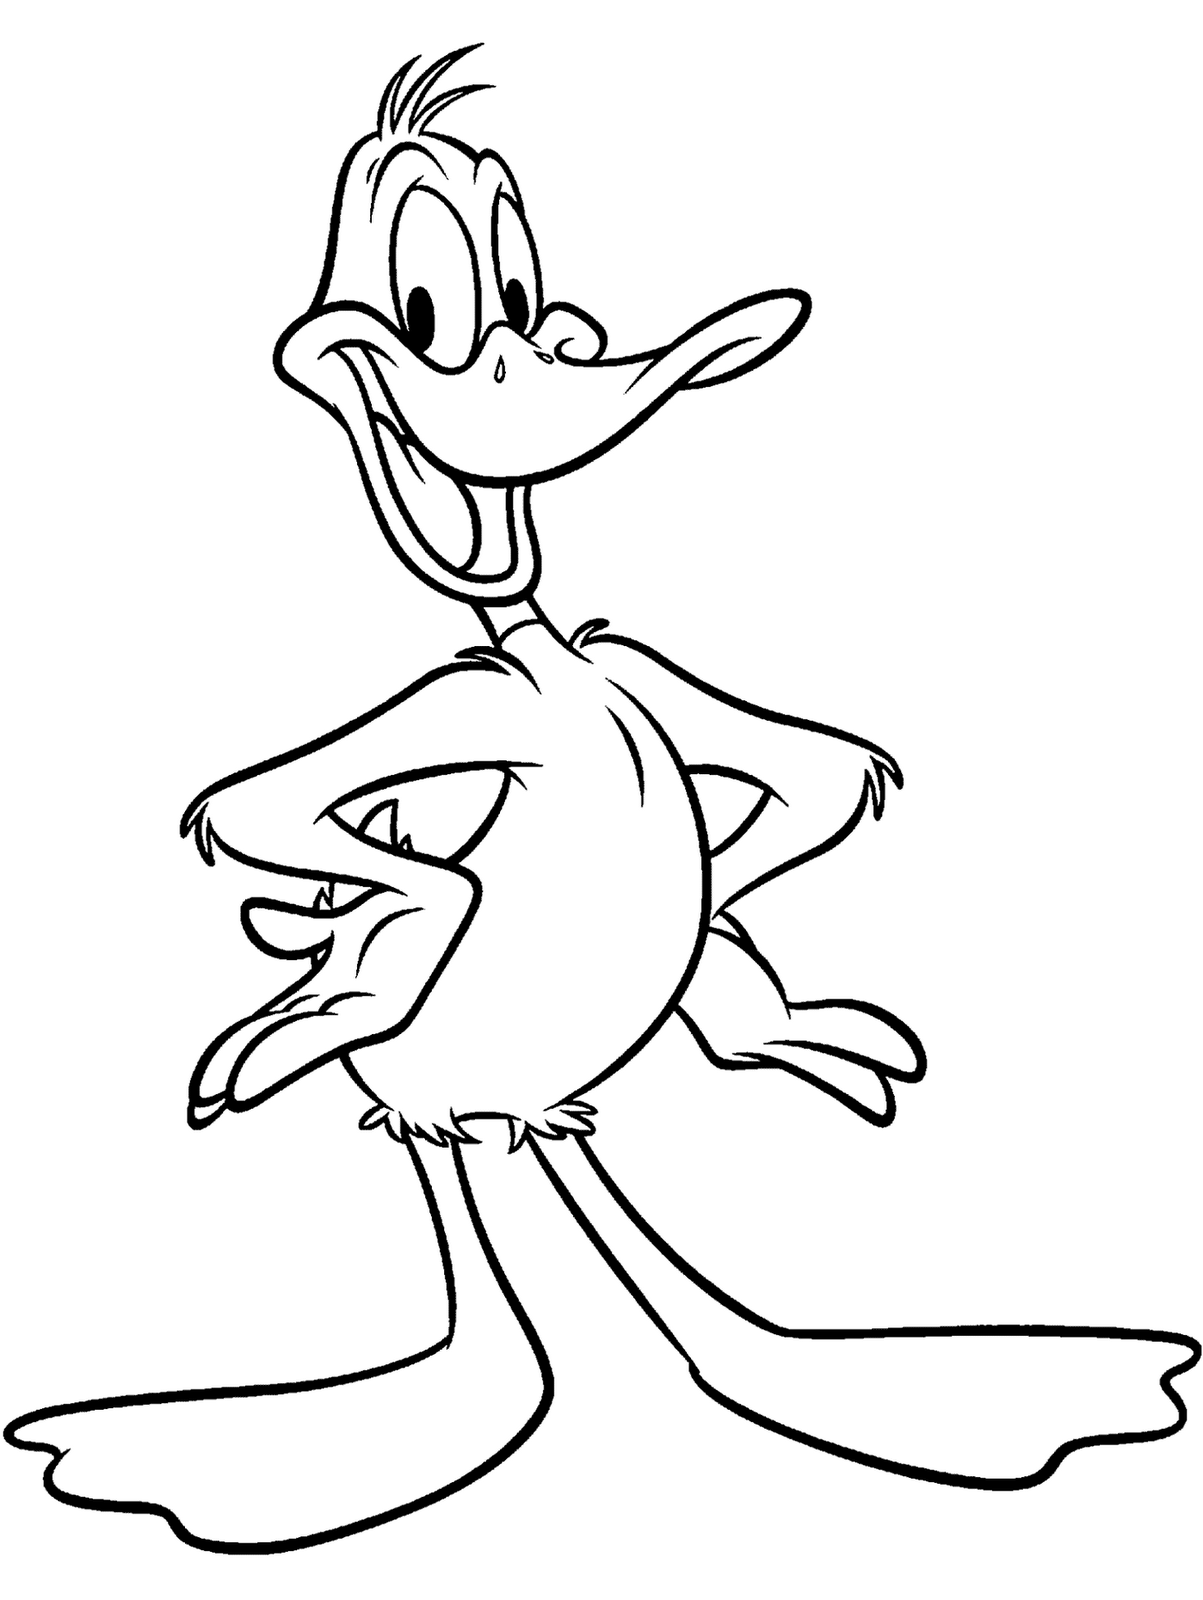 Duck Hunting Coloring Pages | Coloring Page